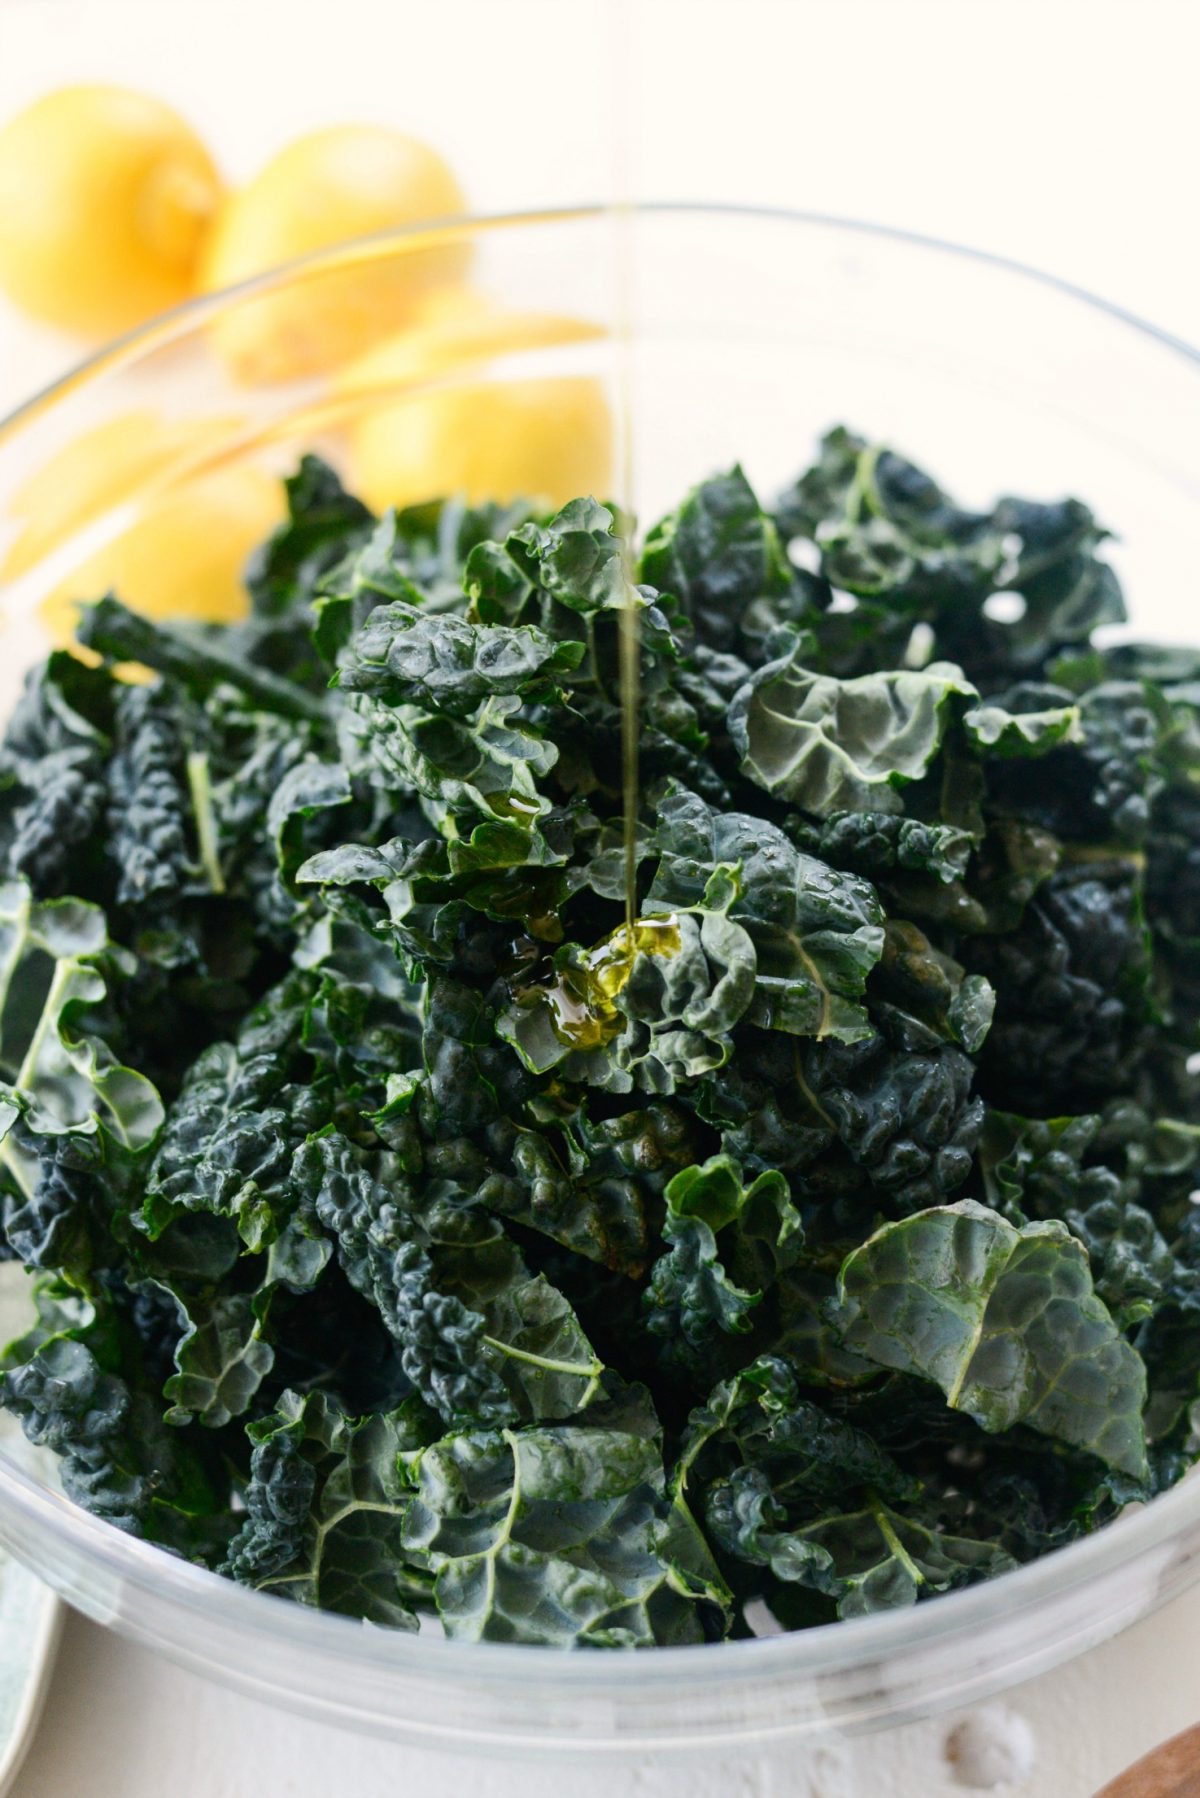 drizzle kale with olive oil.